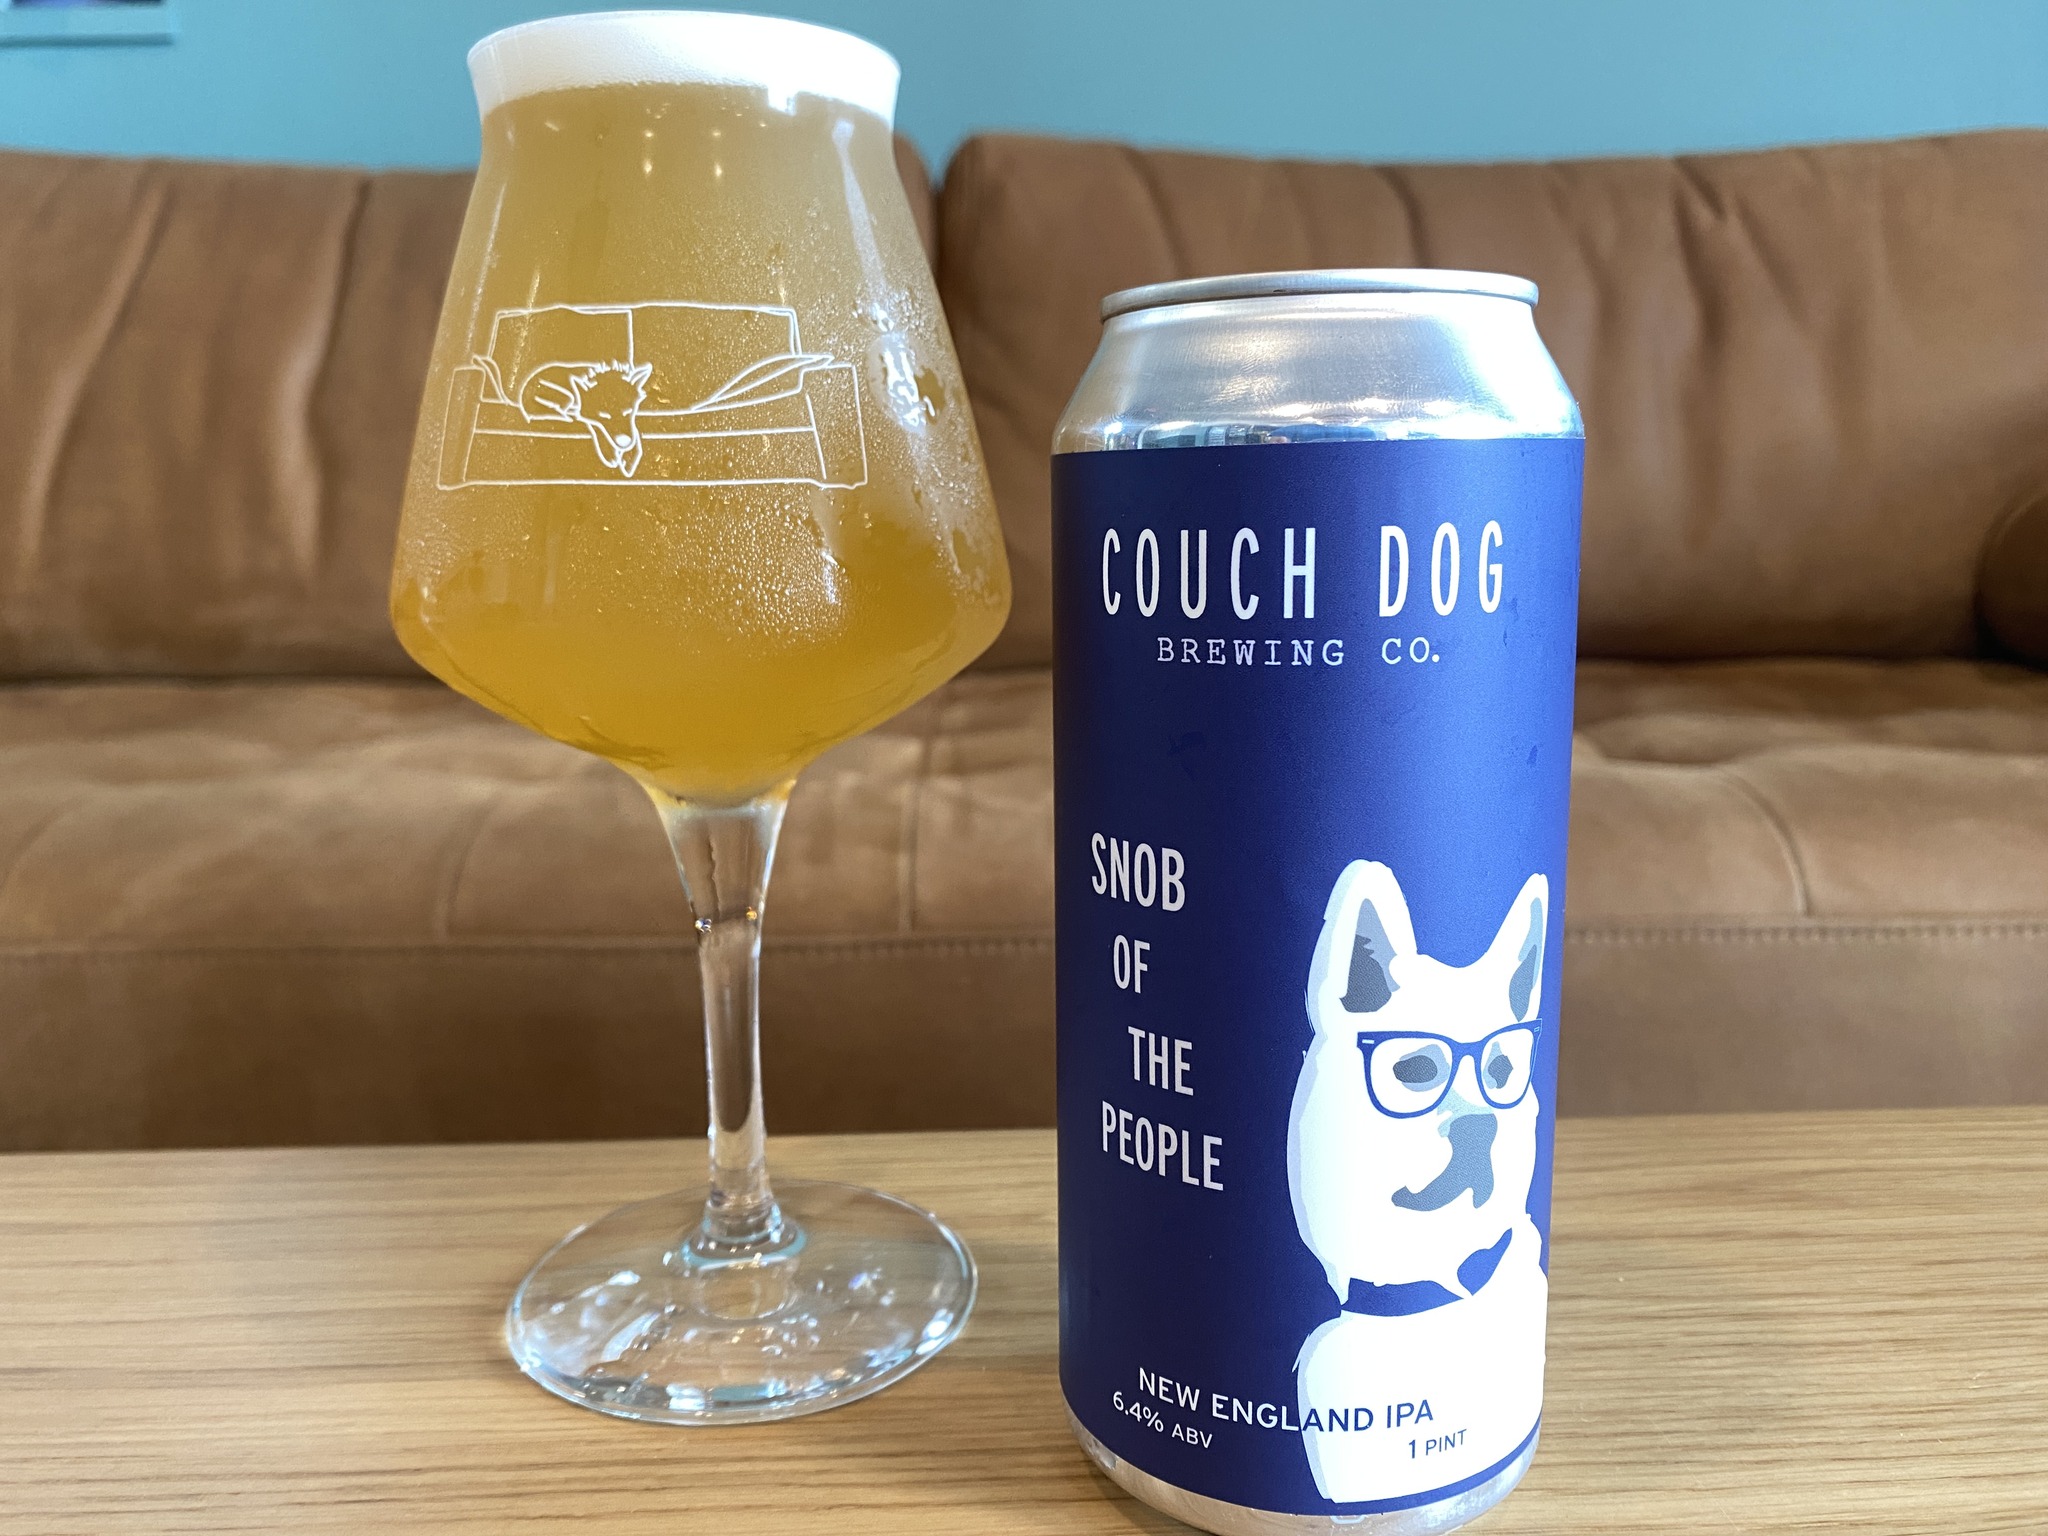 A glass of beer next to a can of couch dog.